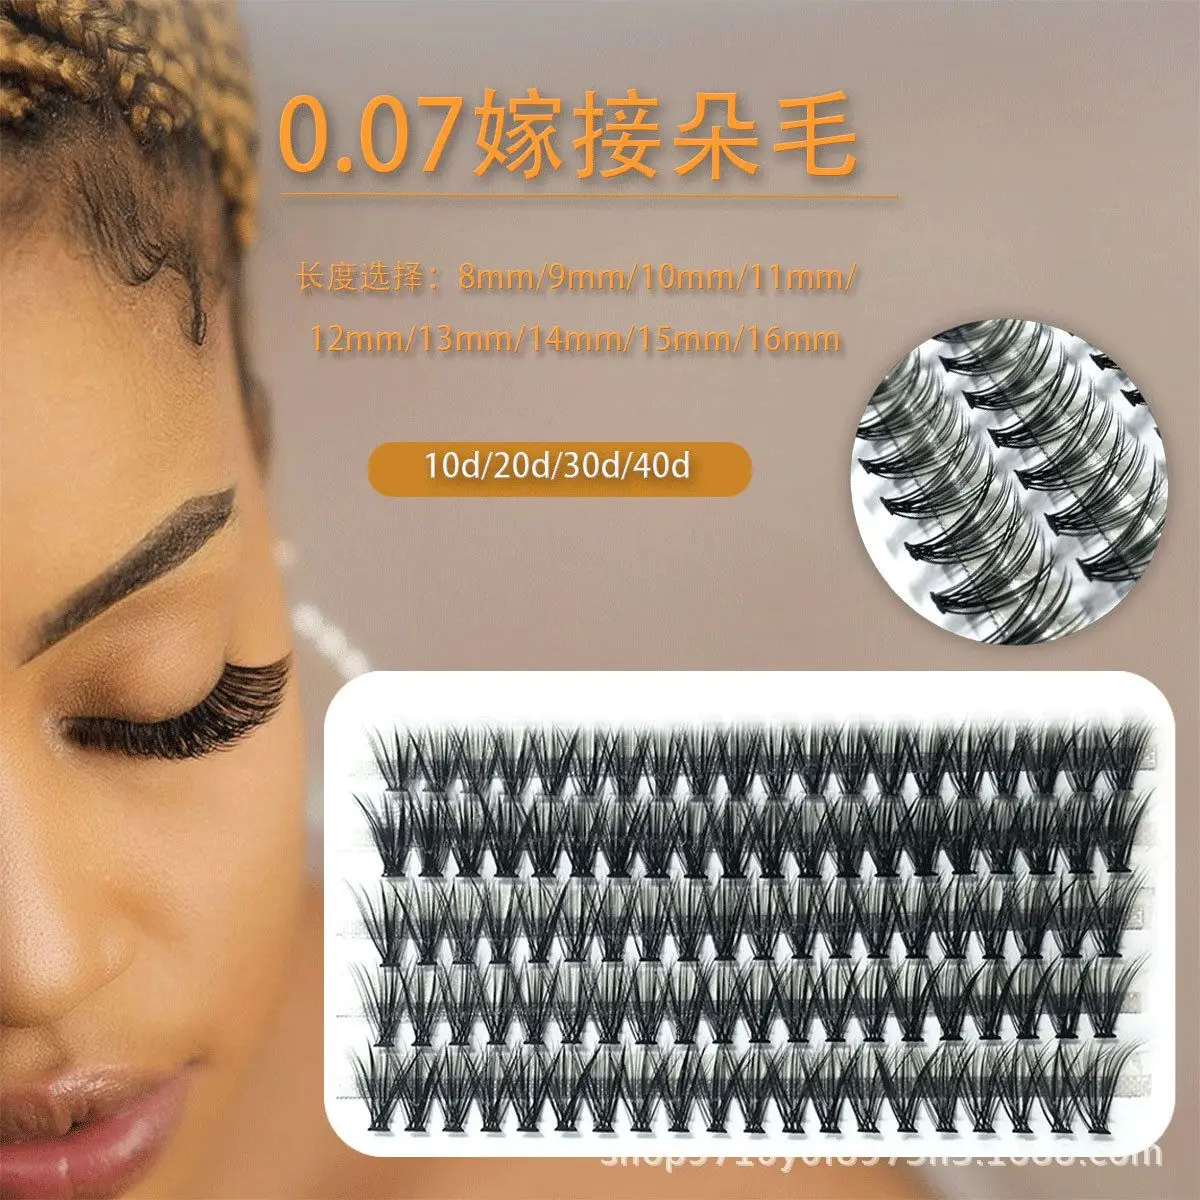 

5Rows Individual Lashes Natural Soft Thick Cluster False Eyelashes 10D/20D/30D/40D Mink Volume Eyelashes Eye Extension Tool